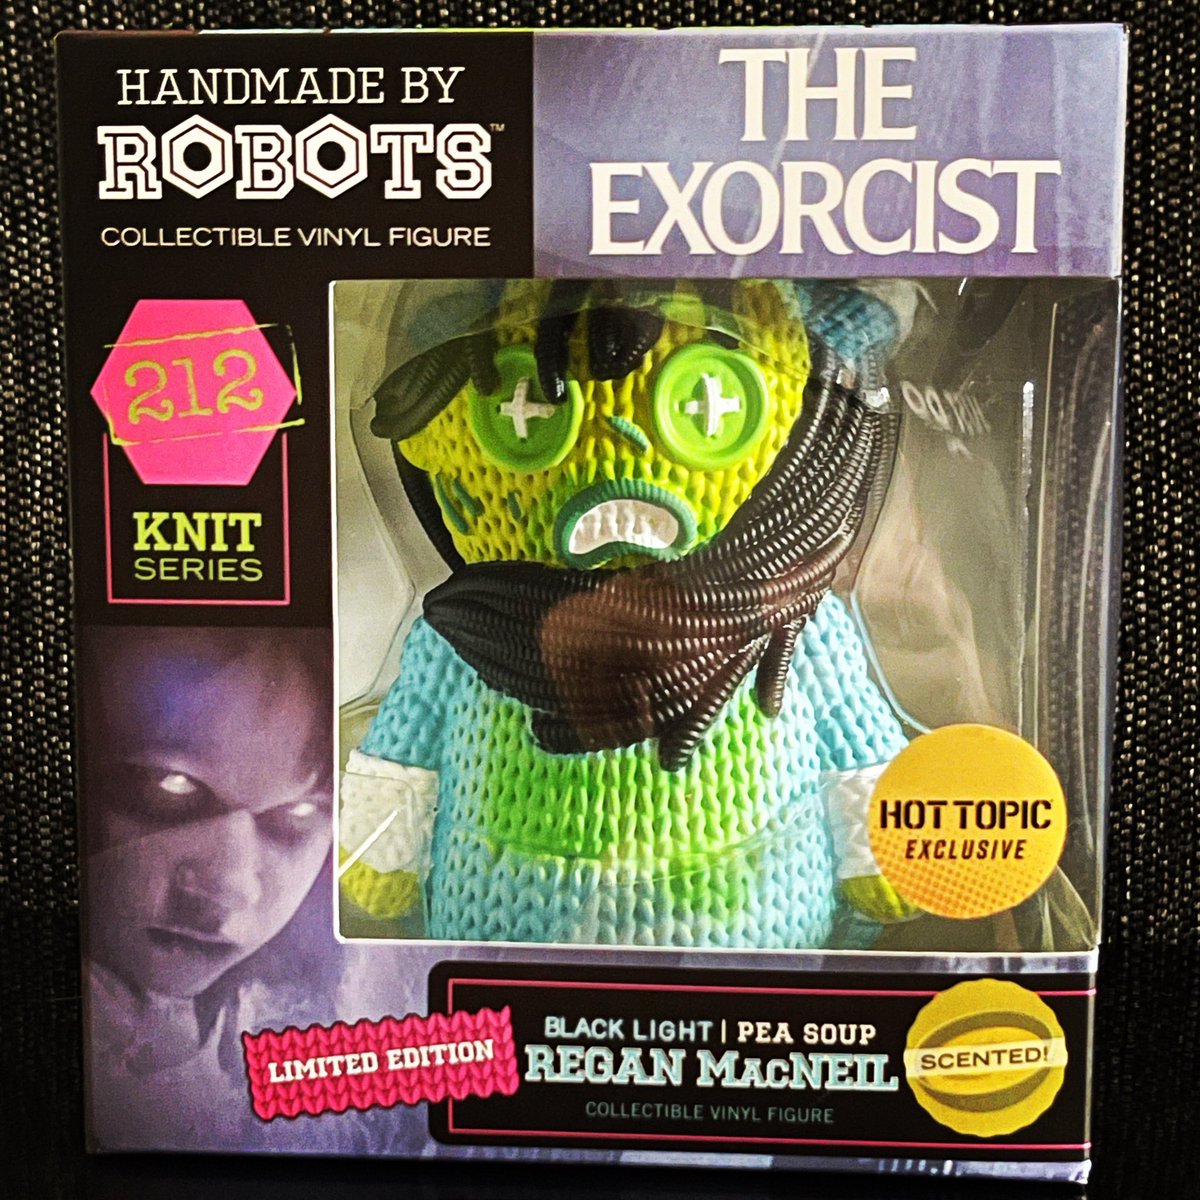 Anyone take a whiff of this Regan figure? Tempted to open but not sure I wanna smell vinyl Pea Soup 

#handmadebyrobots #Collectibles #HorrorCommunity #regan